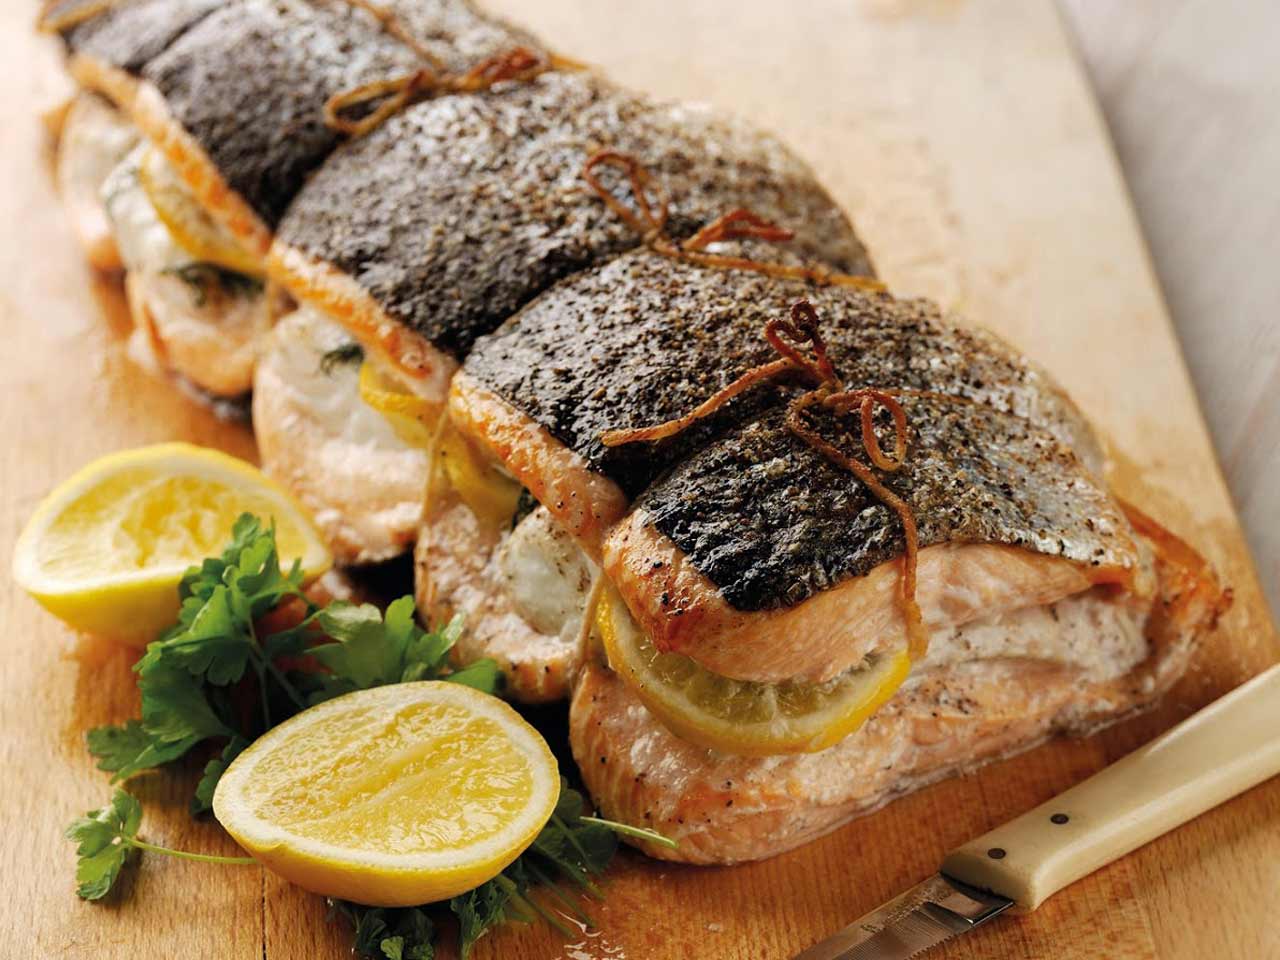 Salmon fillets stuffed with cod